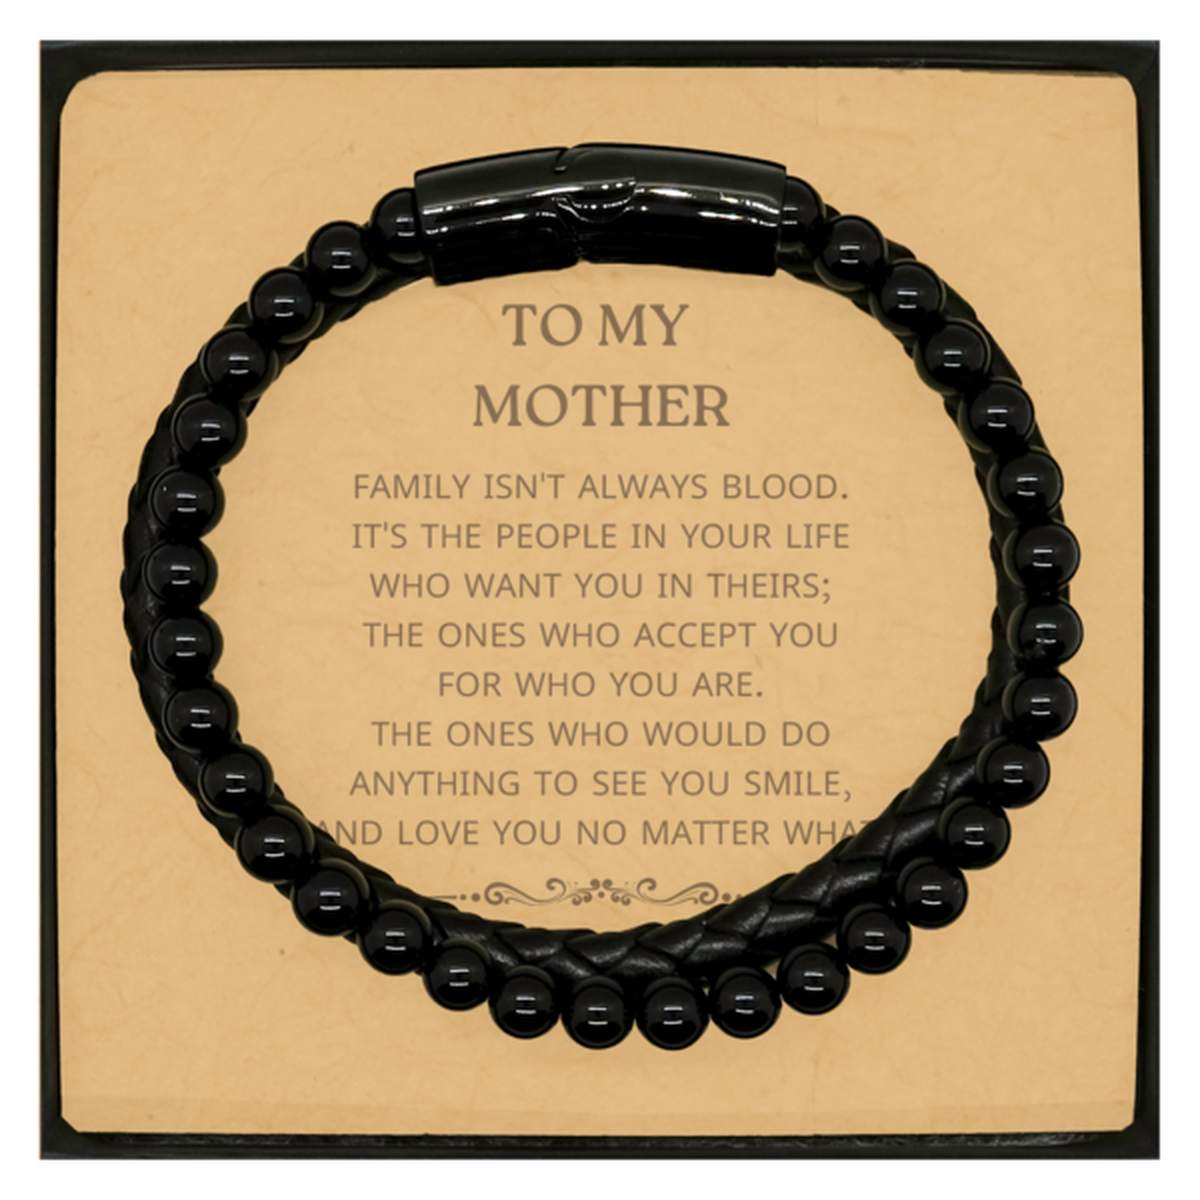 To My Mother Gifts, Family isn't always blood, Mother Stone Leather Bracelets, Birthday Christmas Unique Present For Mother